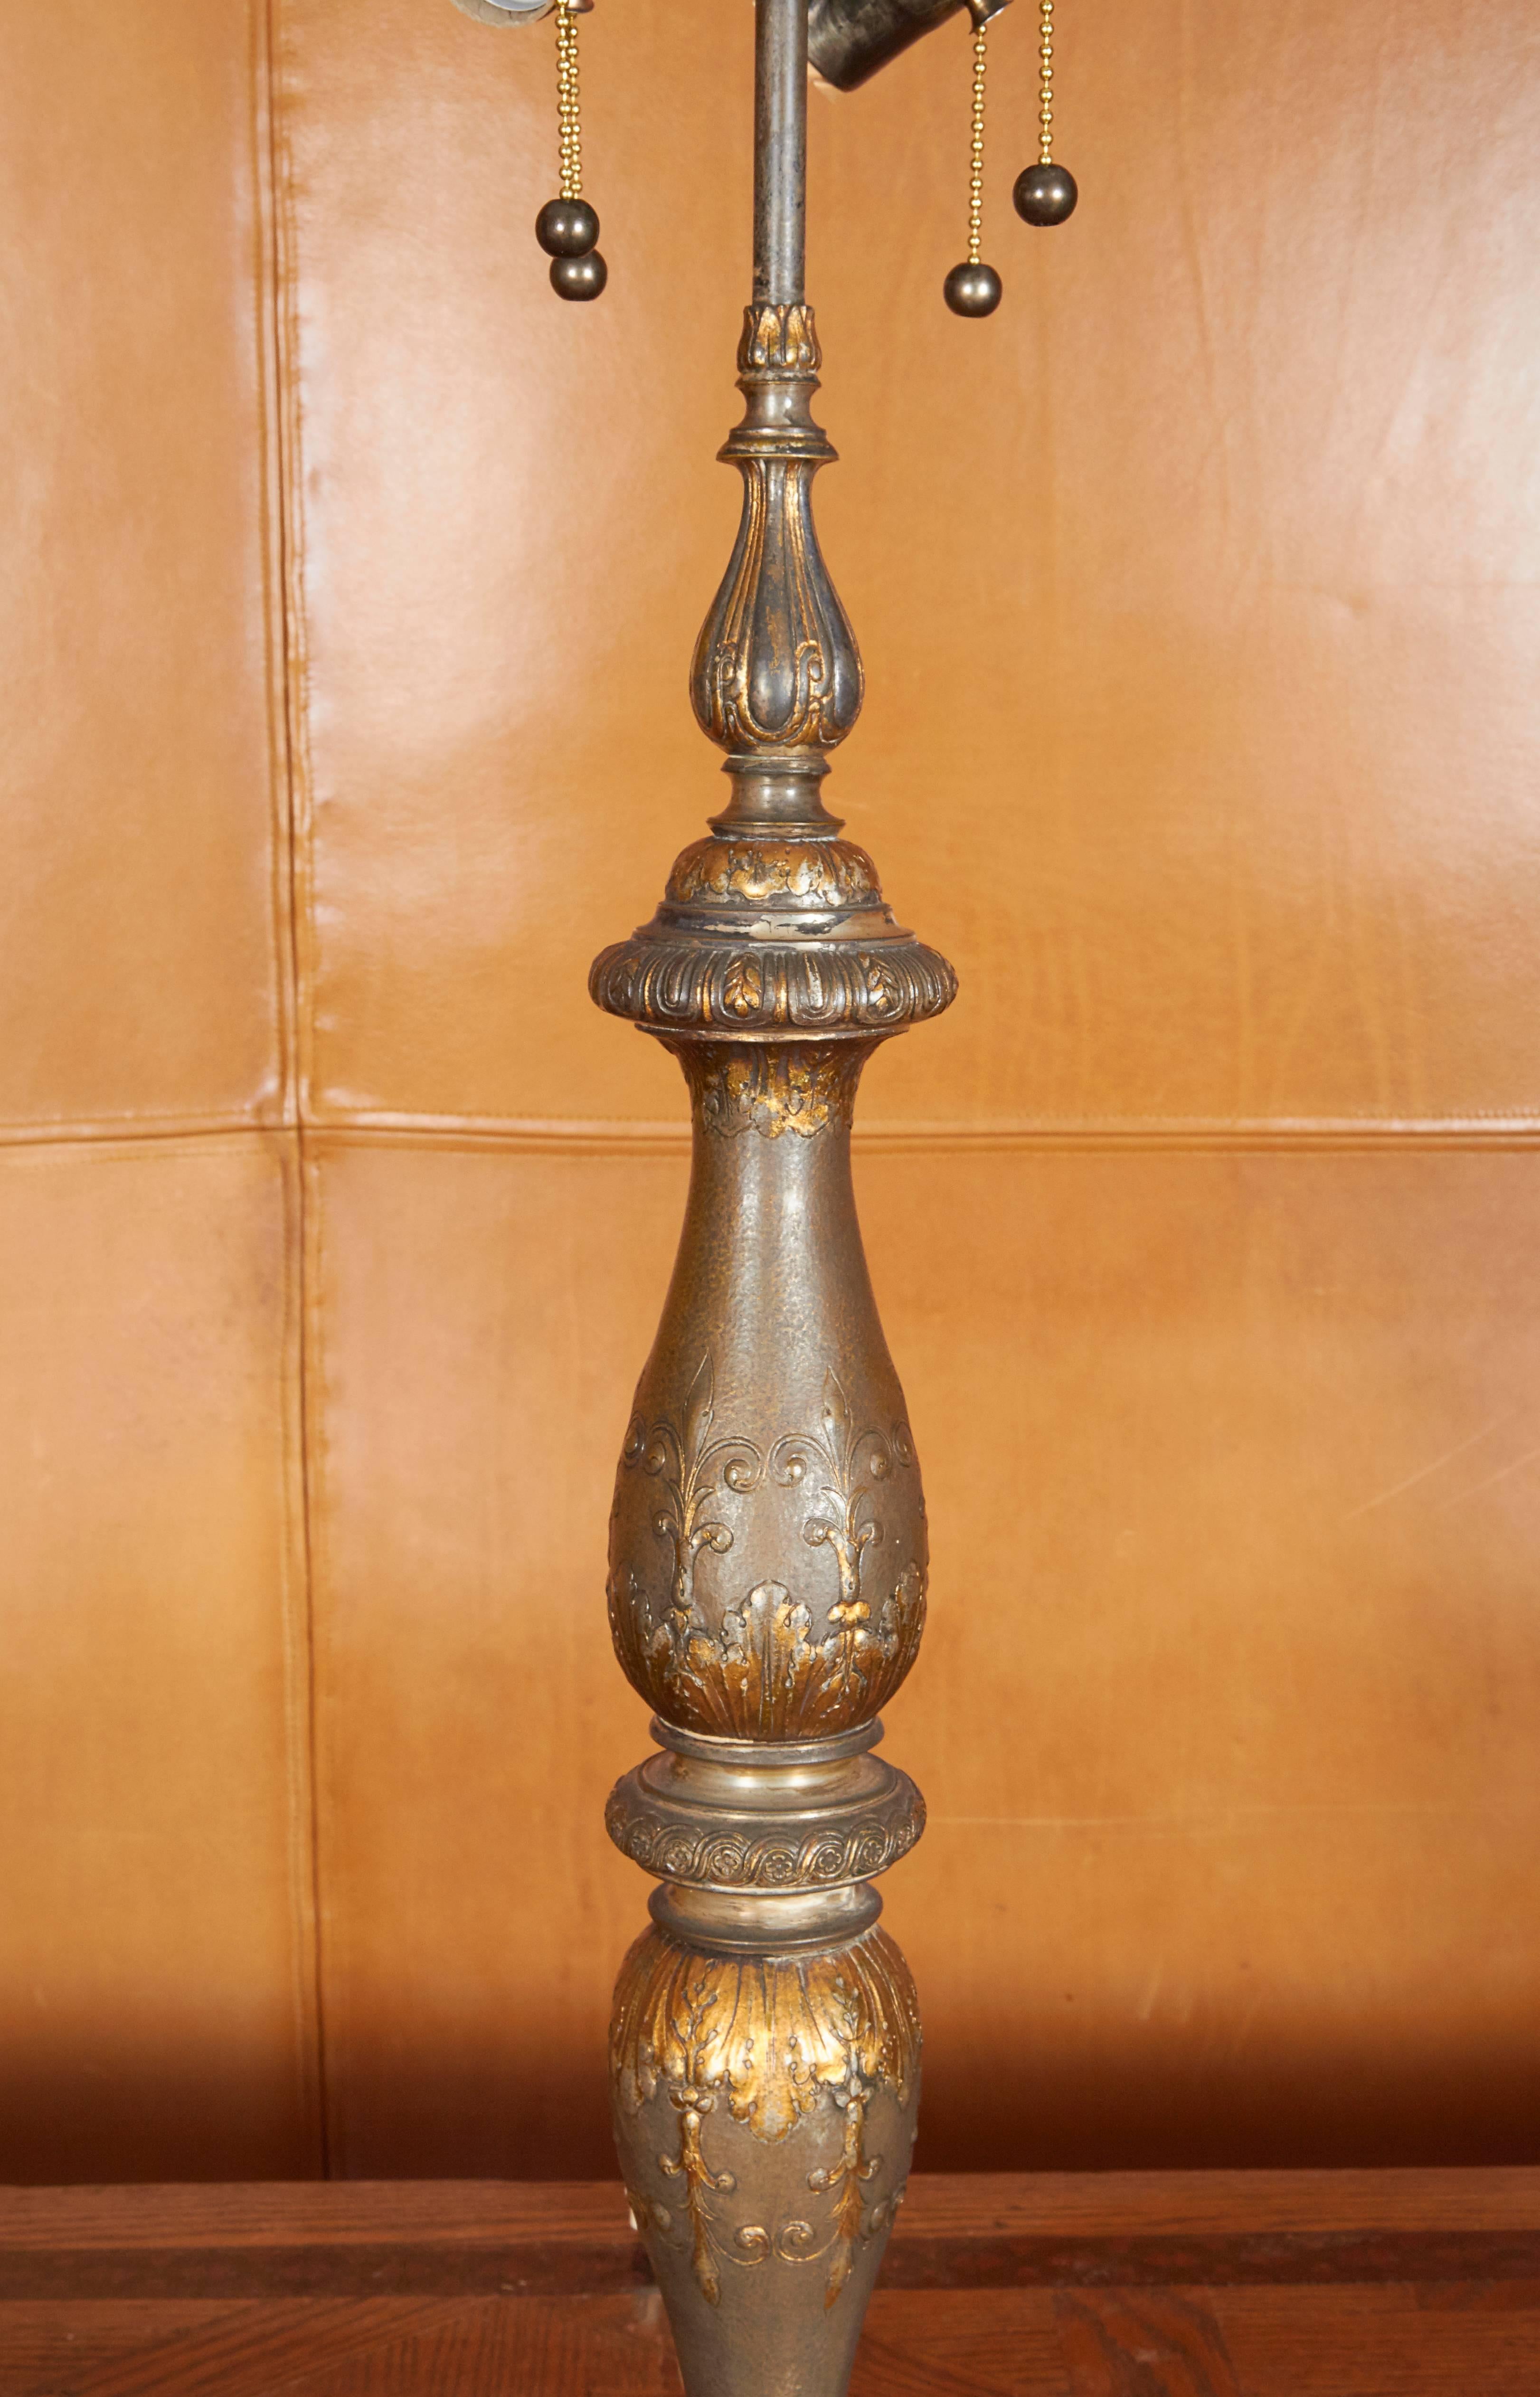 Regency William IV Bronze and Gilt Table Lamp Attributed to Thomas Messenger and Sons